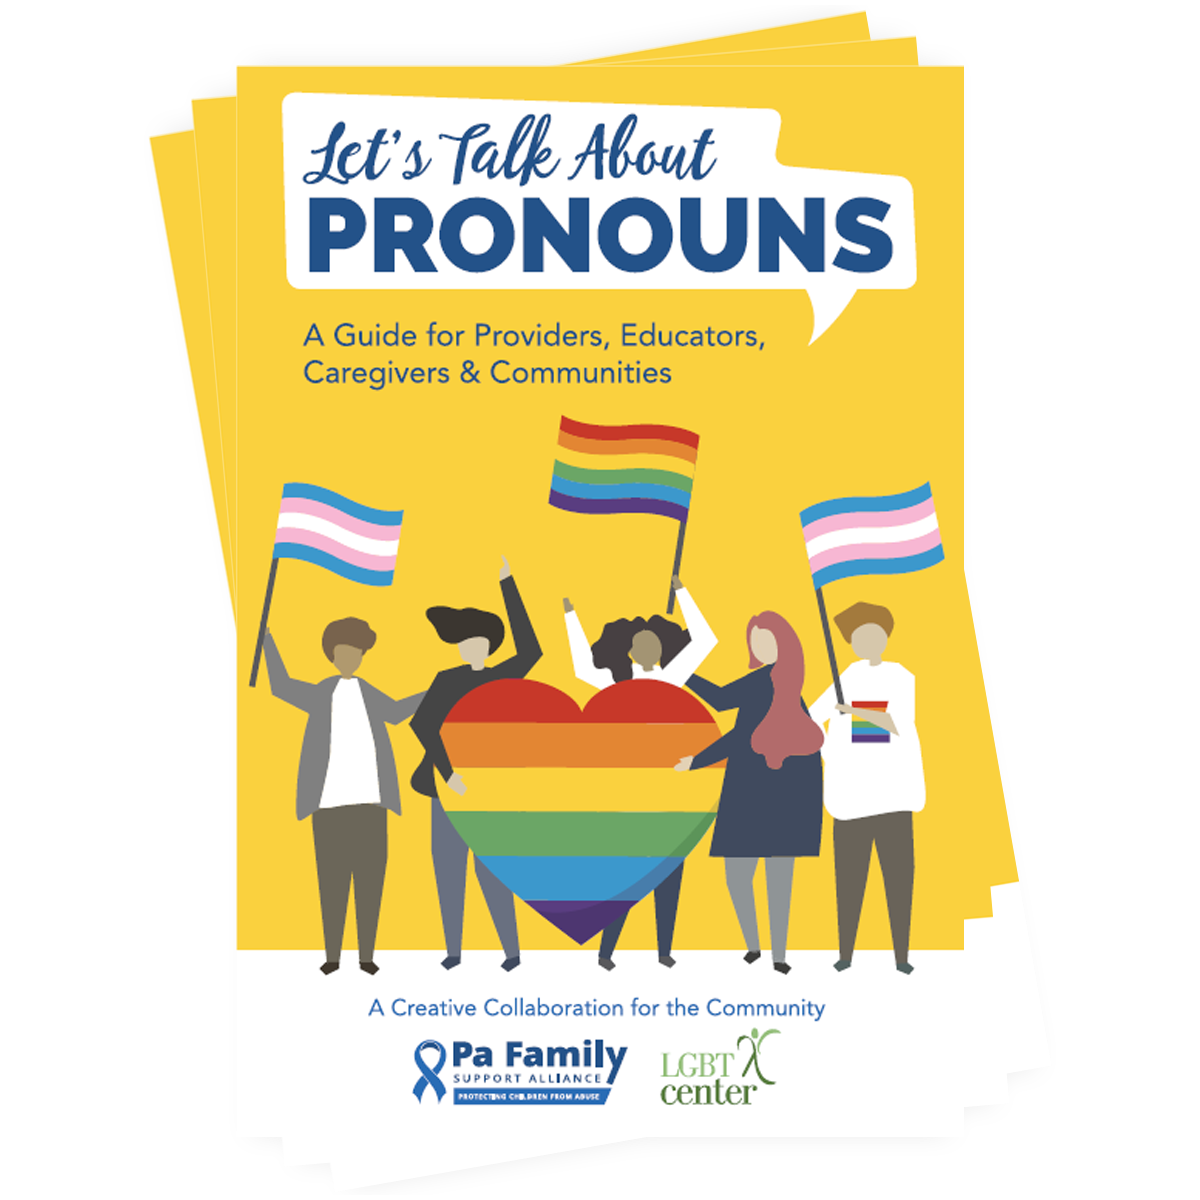 let-s-talk-about-pronouns-50-pack-pennsylvania-family-support-alliance